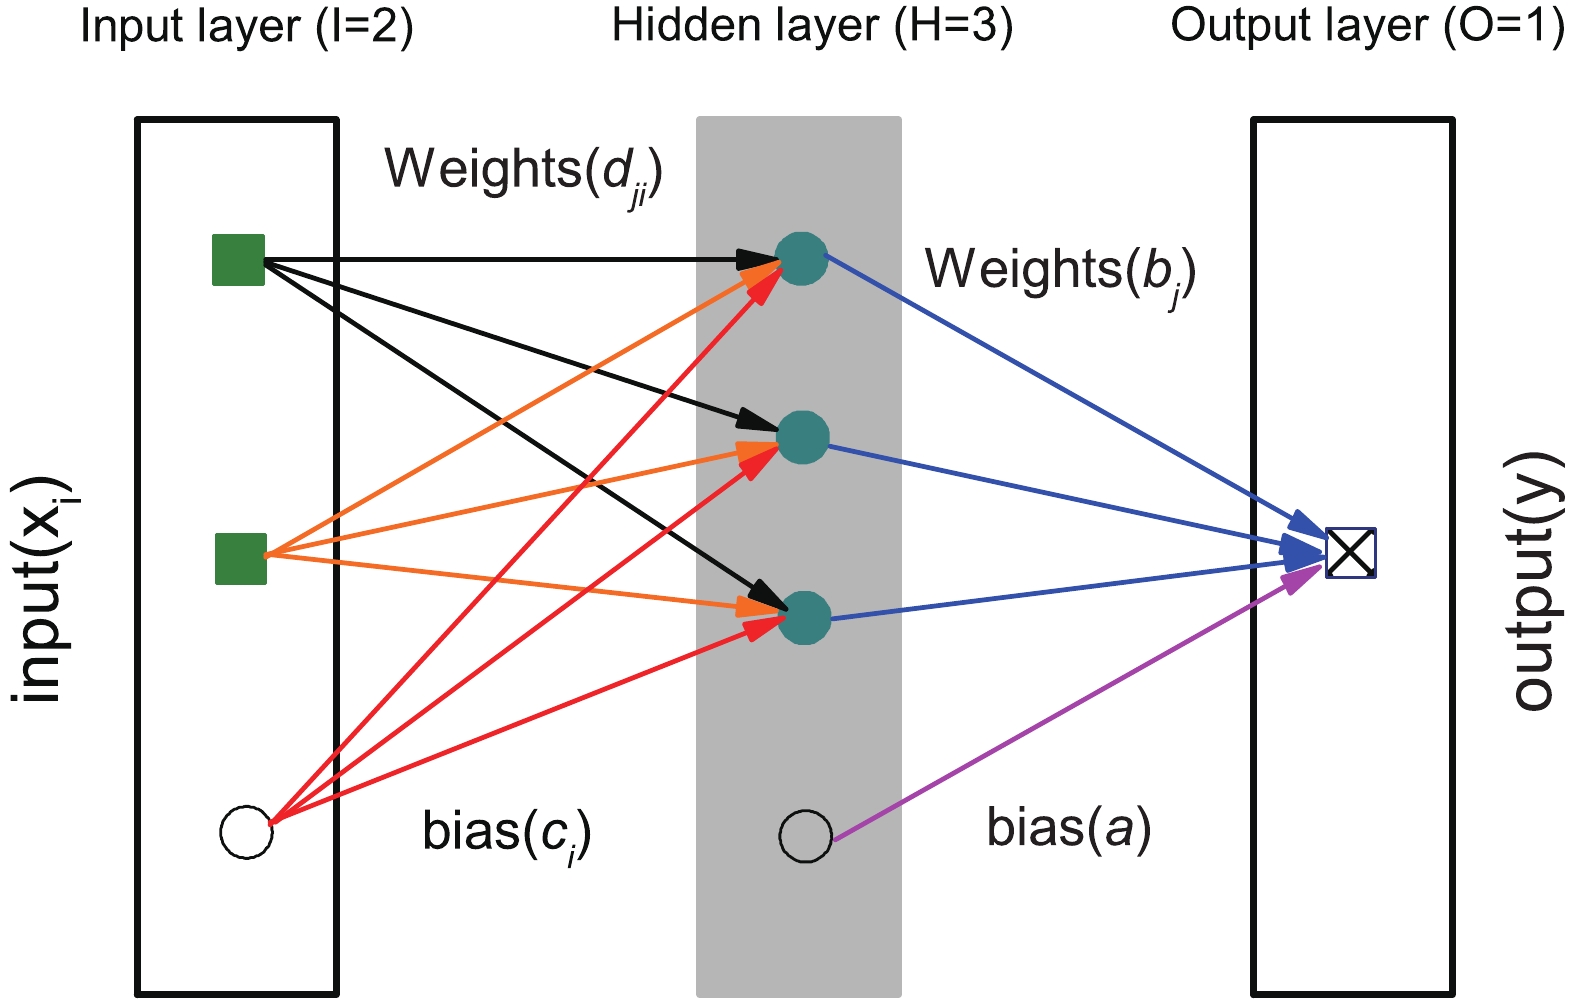 (color online) A schematic diagram of a neural network with a single hidden layer, three hidden neurons (H = 3) and two input variables (I = 2).